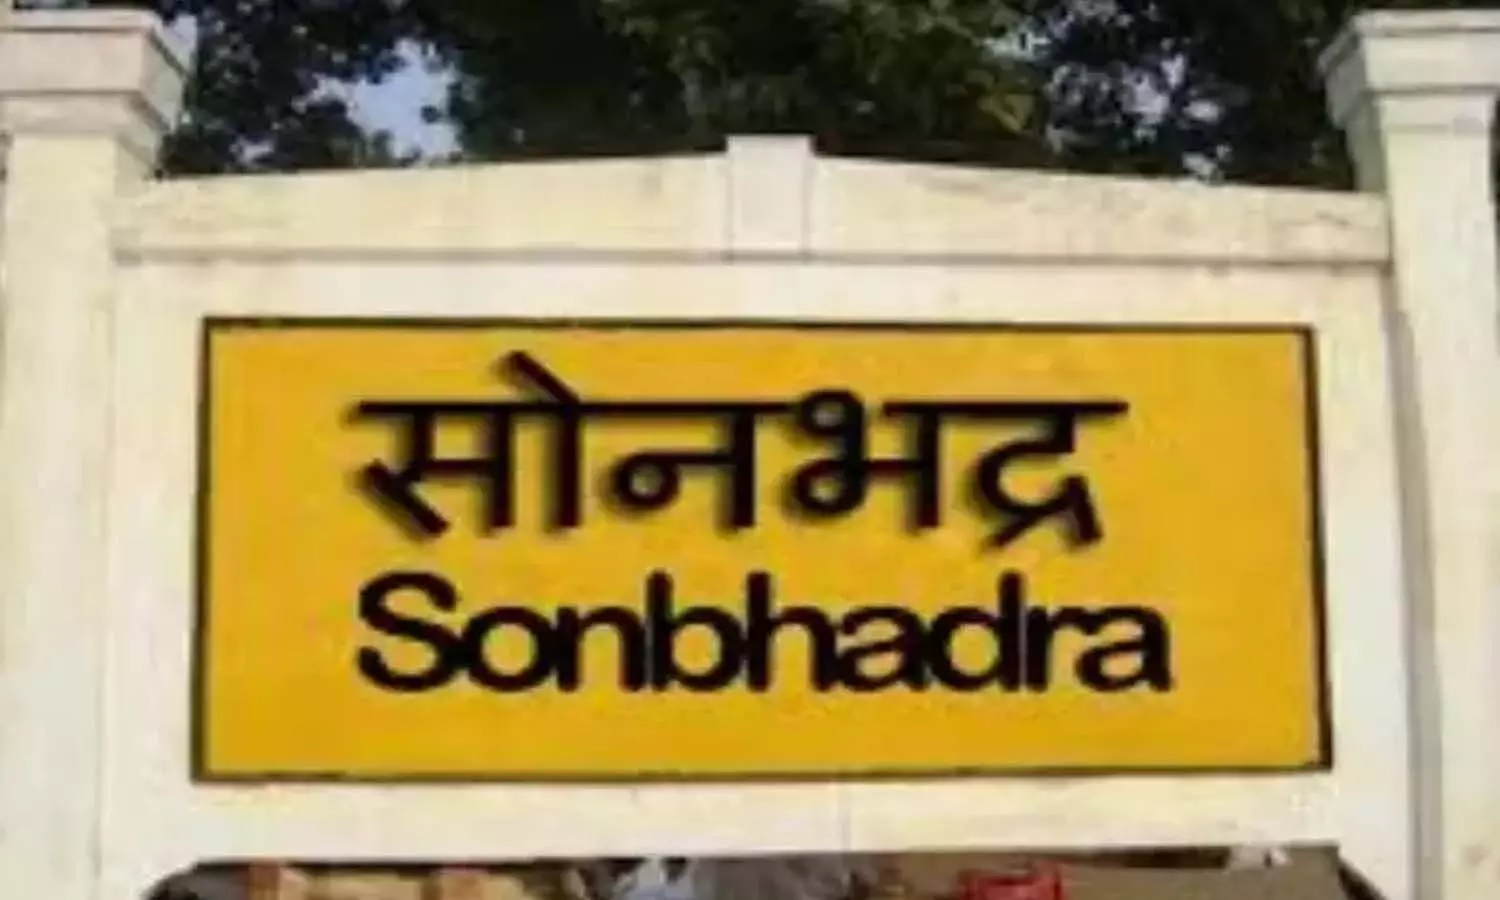 In Sonbhadra, the dispute of tender is not ending in the Zilla Panchayat, the matter reached the Additional Chief Secretary